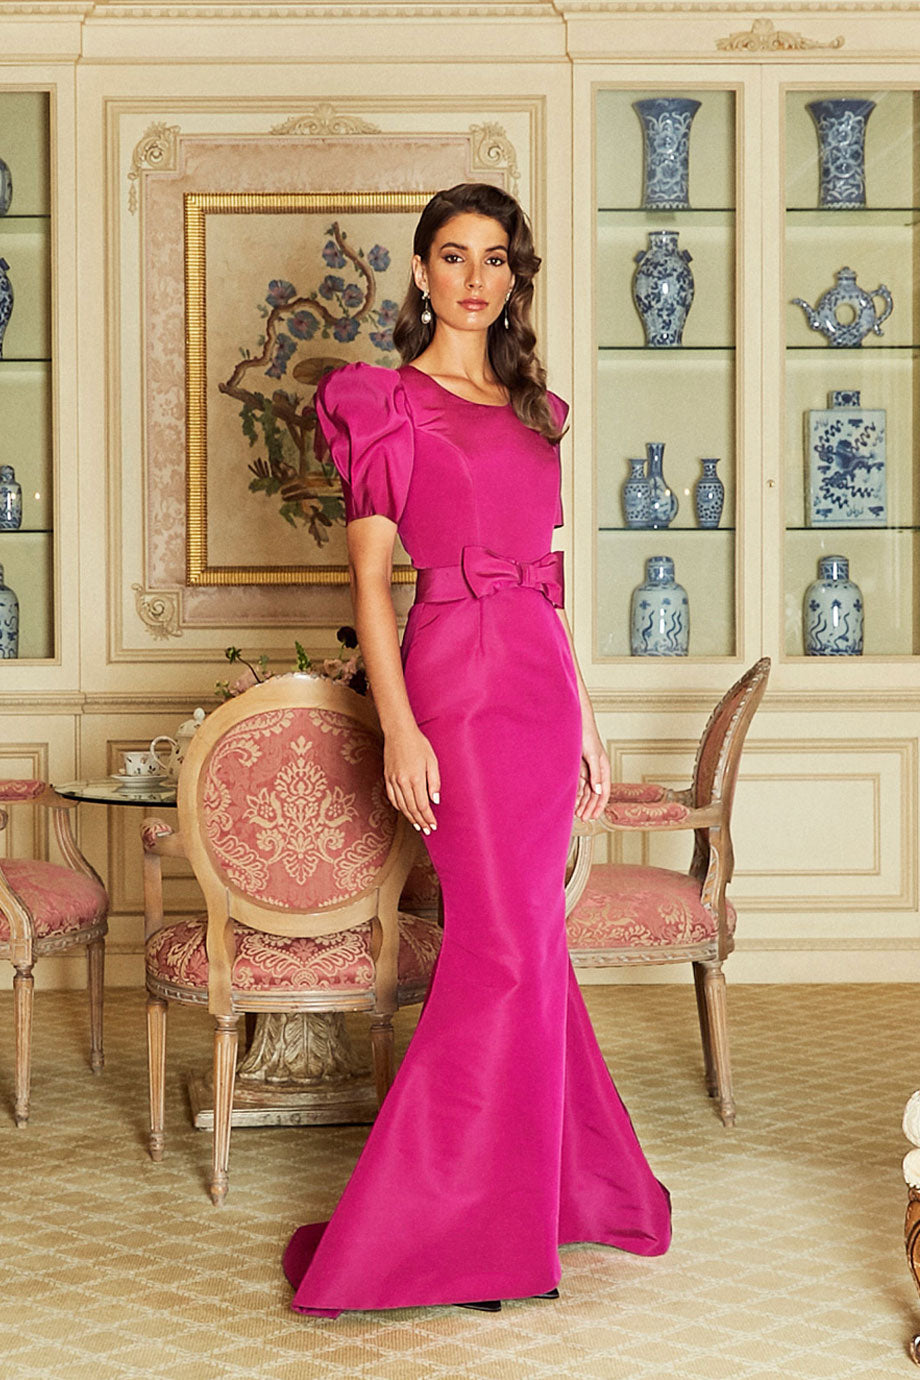 Constance Silk Faille Mermaid Gown with Bow Belt